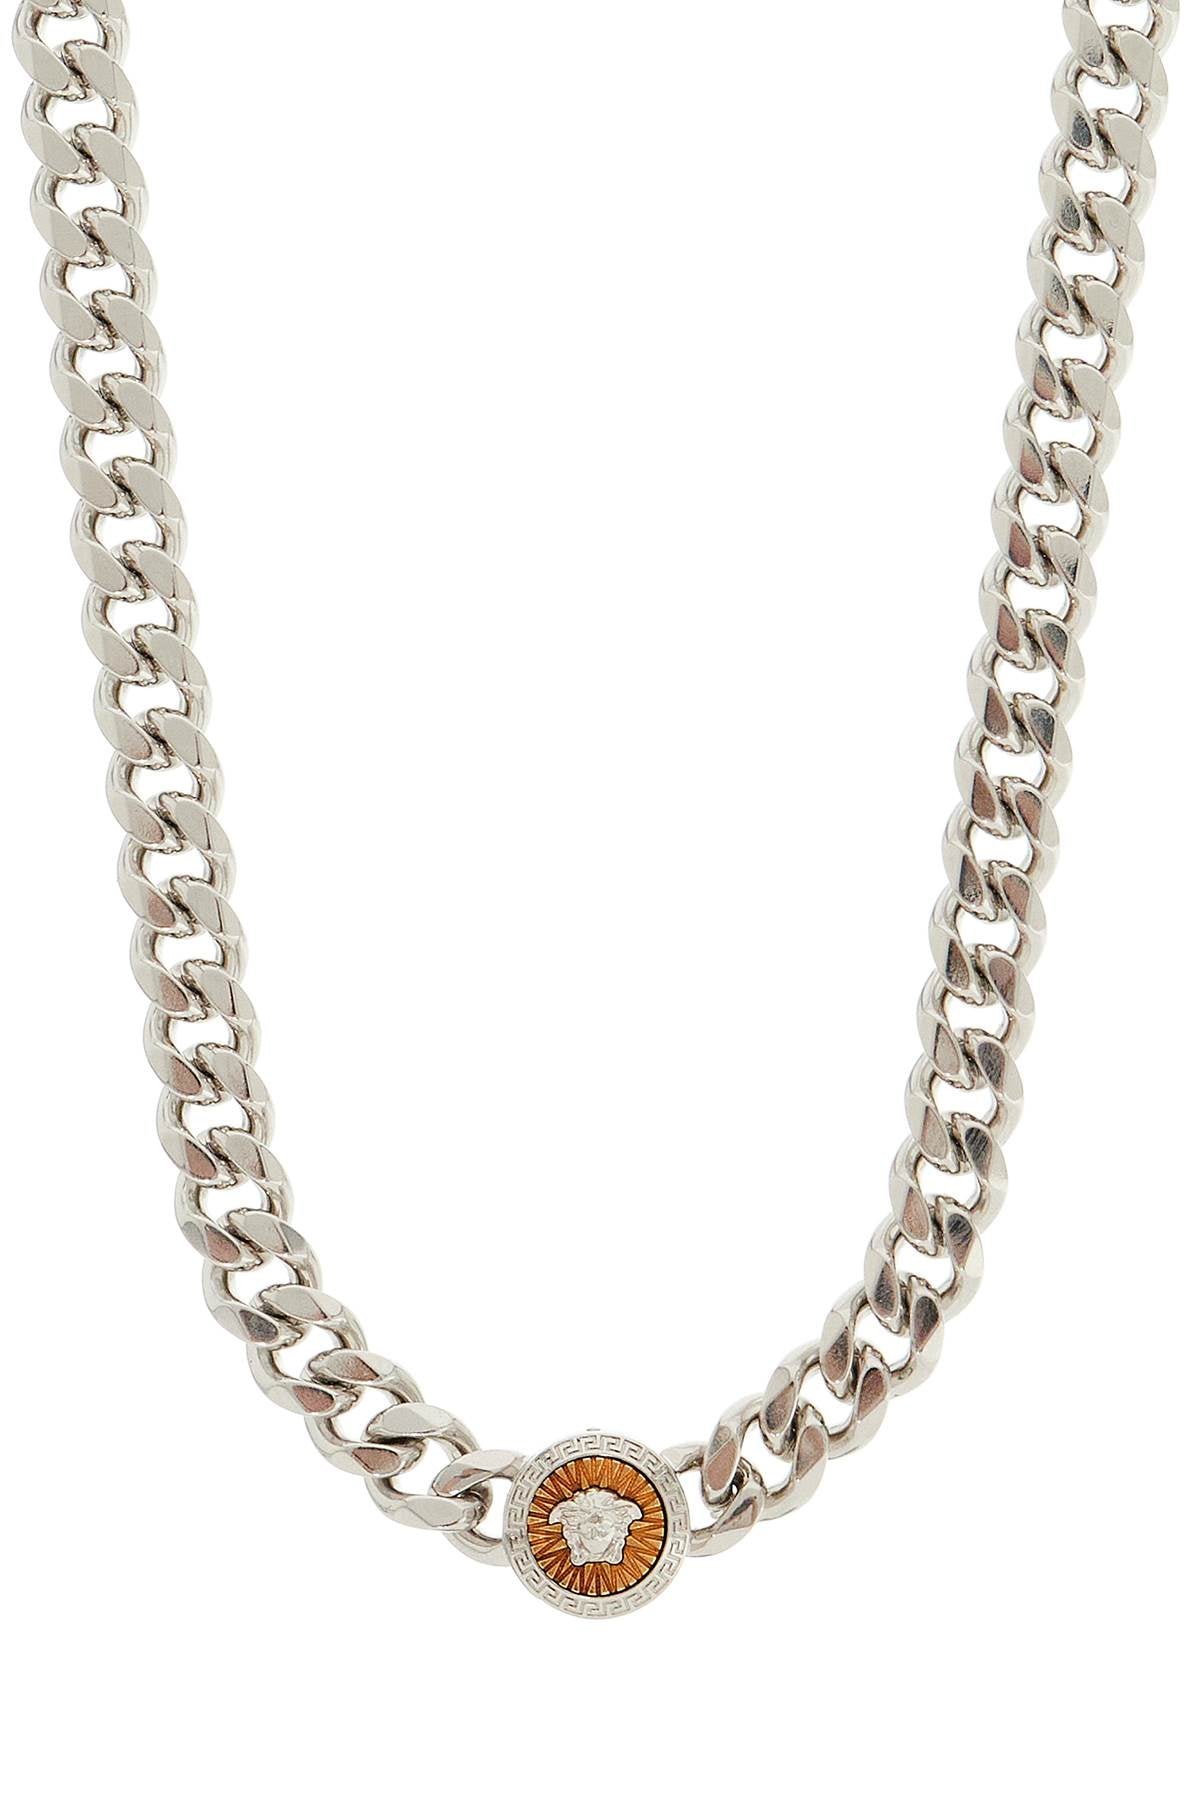 VERSACE MEDUSA CHAIN NECKLACE WITH PENDANT